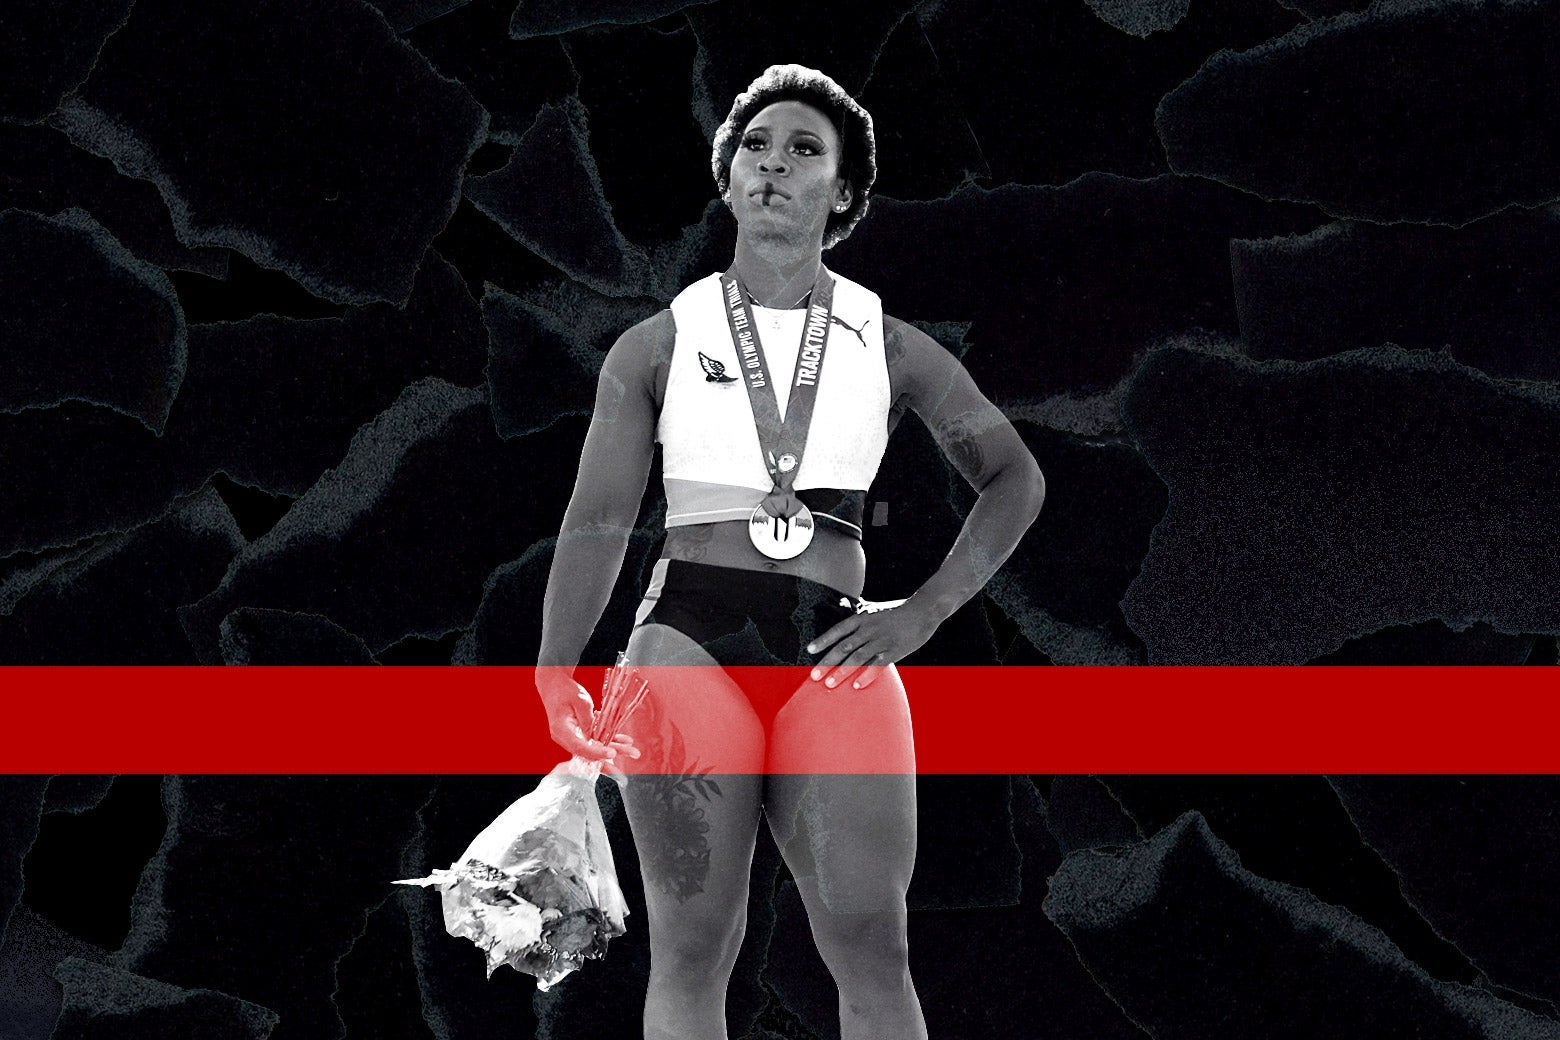 Gwen Berry holds flowers while wearing her medal at the U.S. Olympic trials.